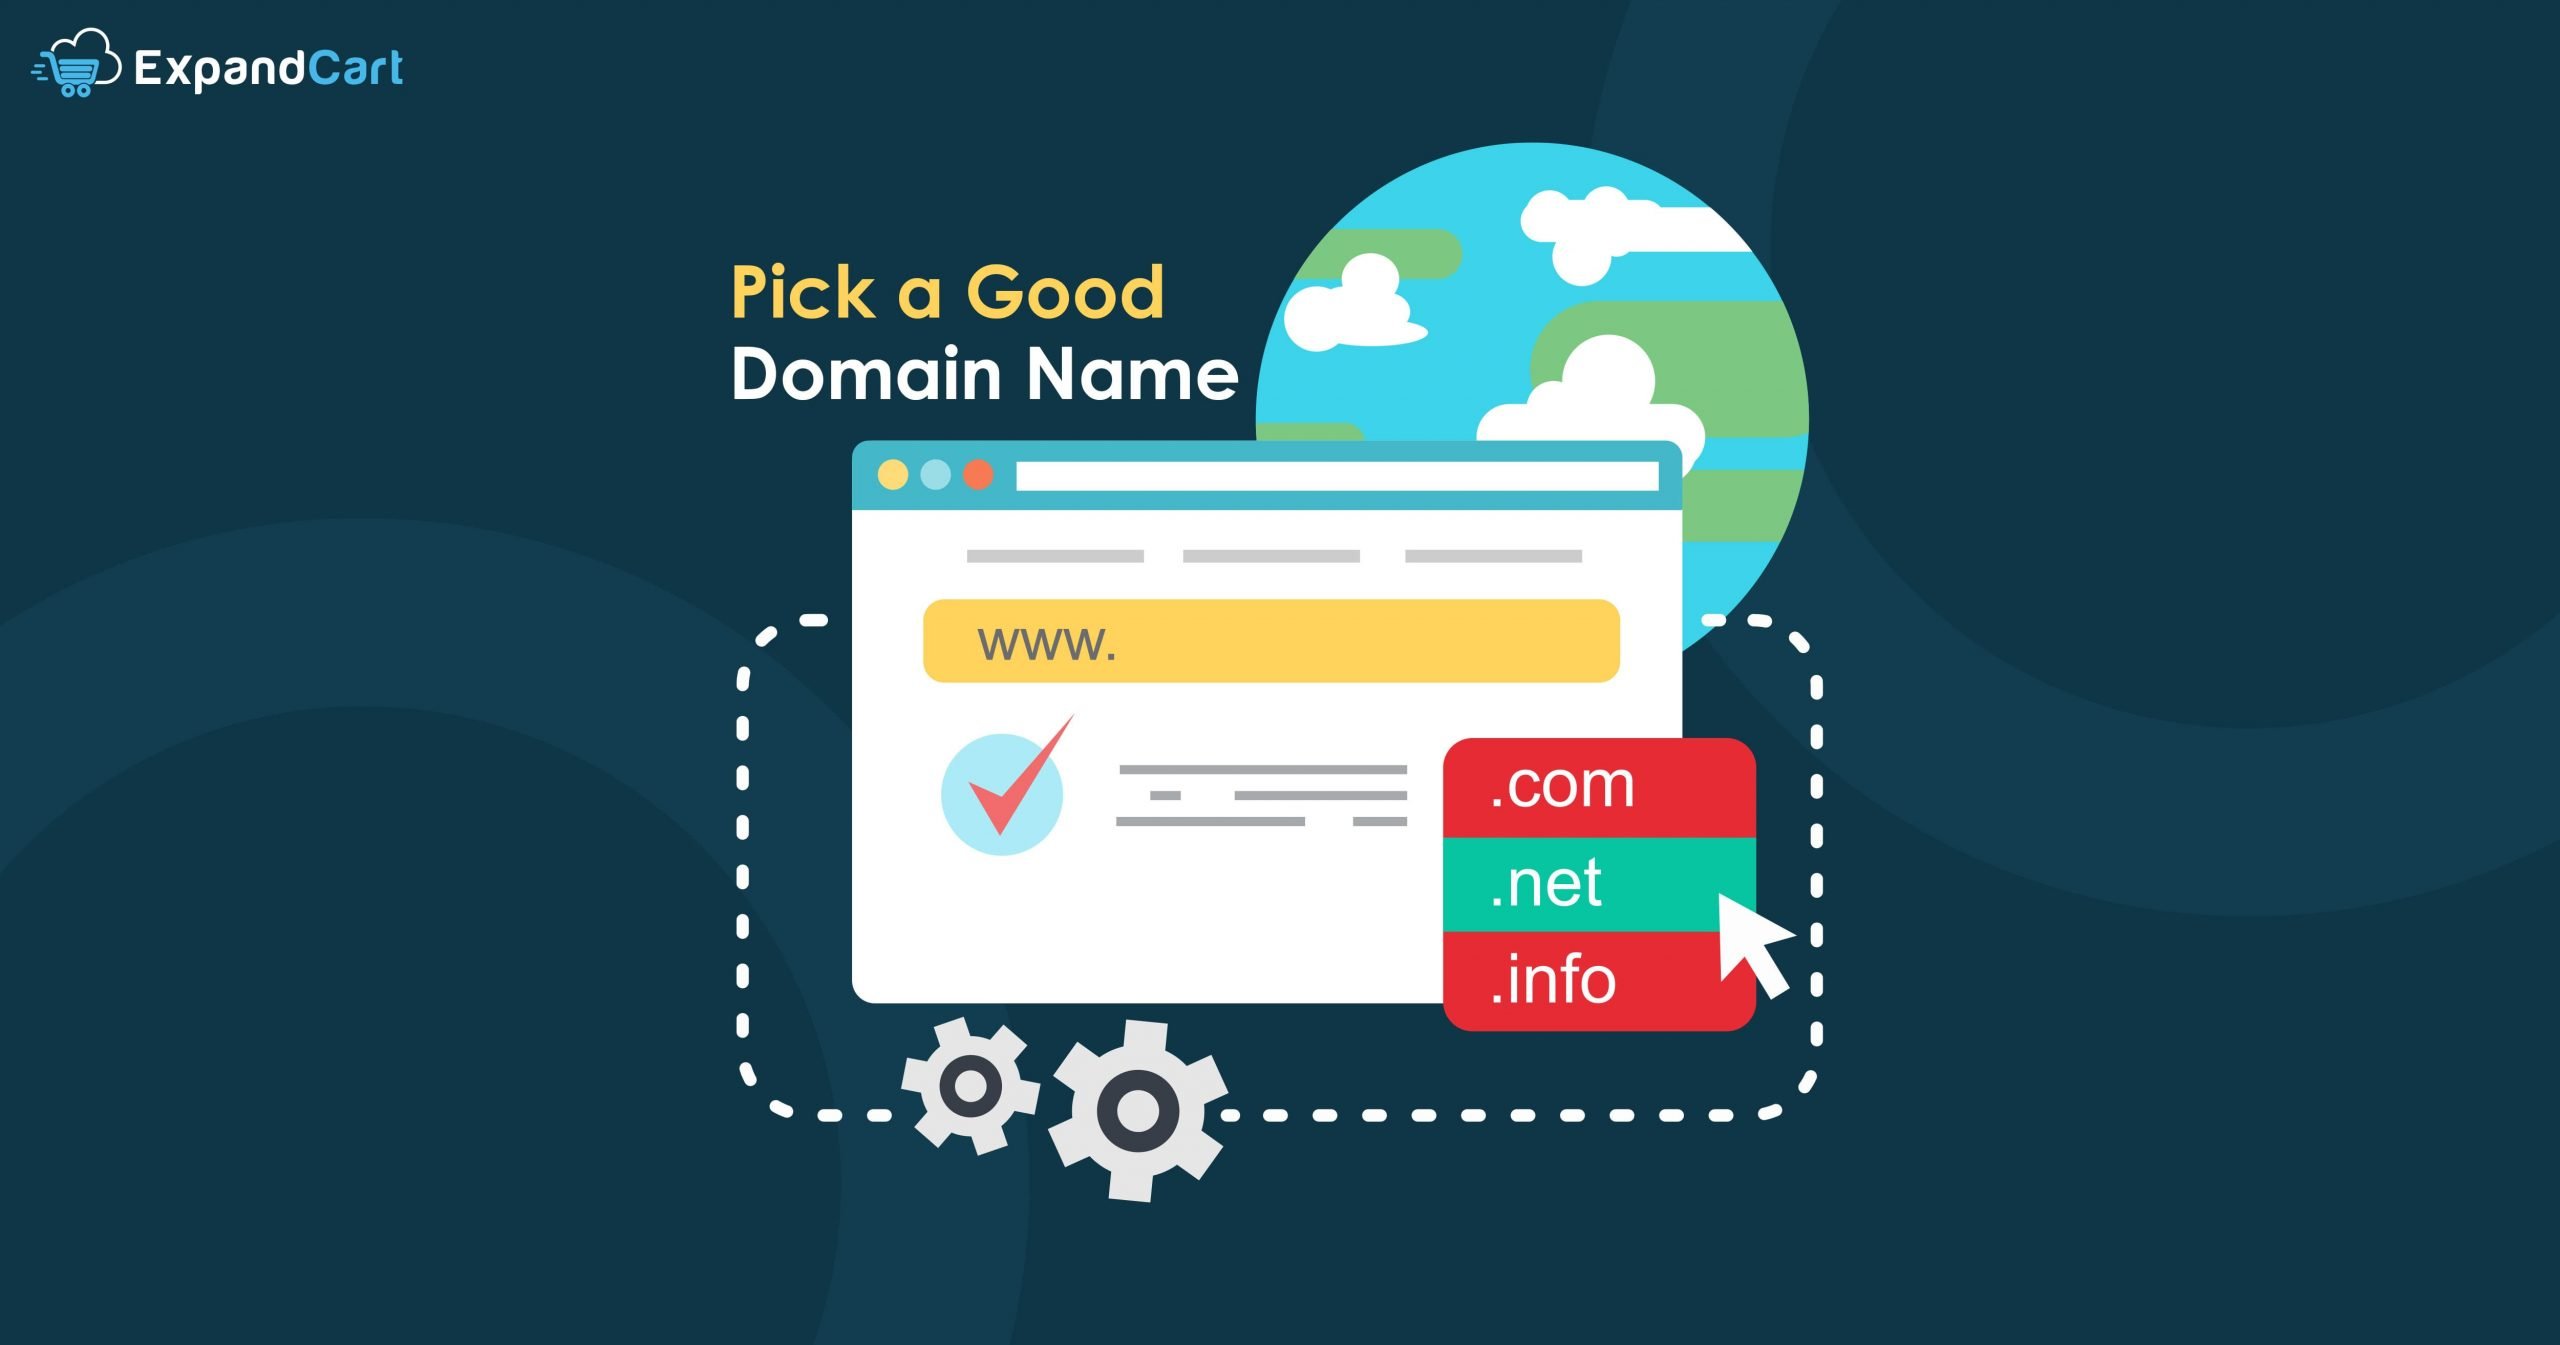 How to Choose the Best Domain Name for Your eCommerce Website